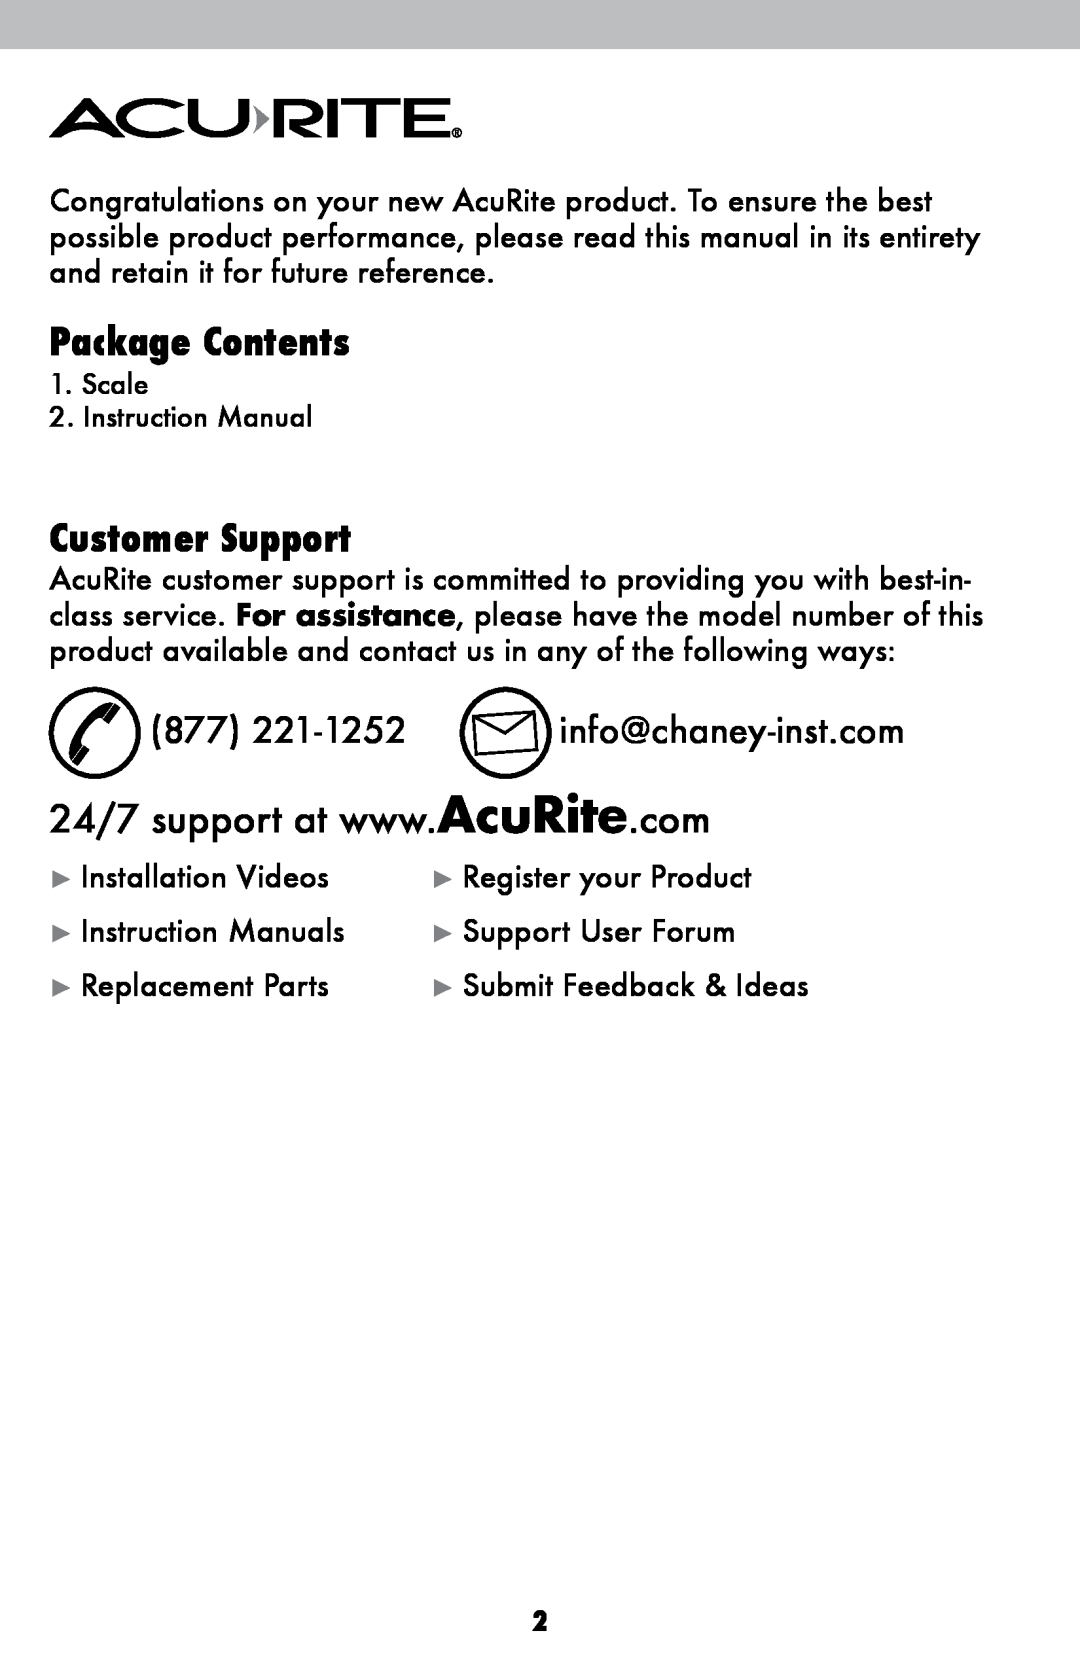 Acu-Rite 932 Package Contents, Customer Support, 877 221-1252 info@chaney-inst.com, Installation Videos, Replacement Parts 